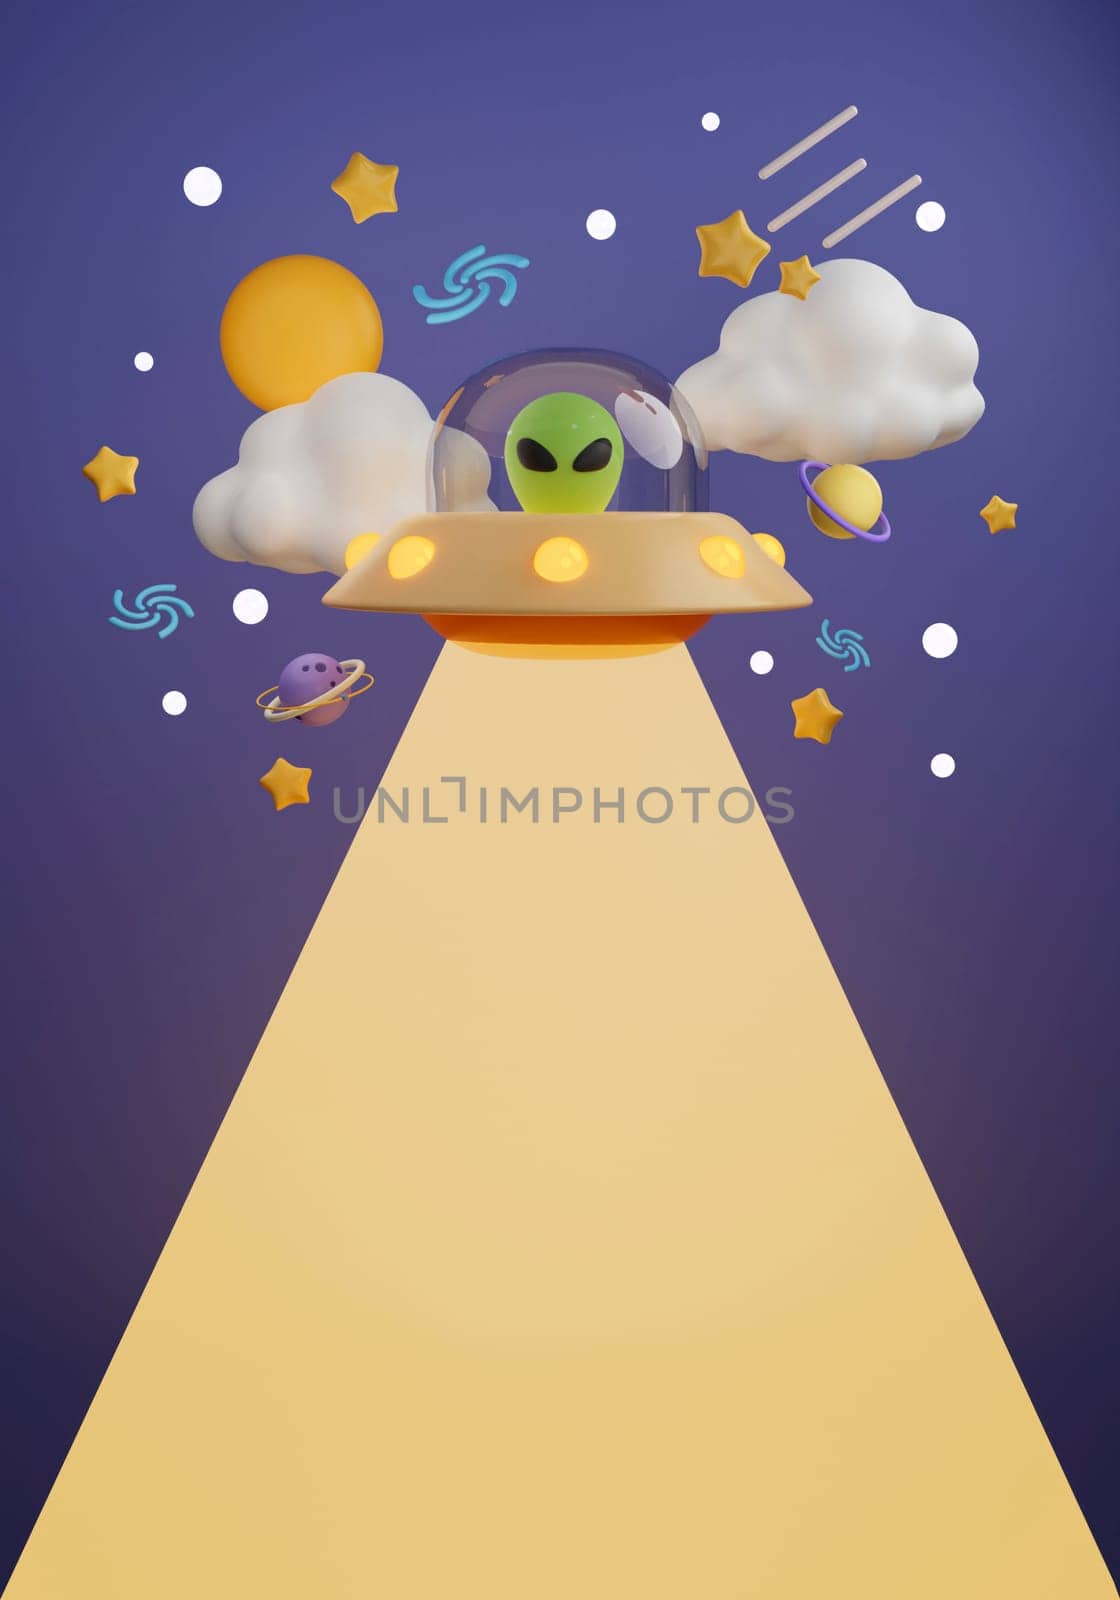 3d Creative cartoon space design with ufo alien with planets and space accessory on dark purple background. banner, 3d render illustration by meepiangraphic